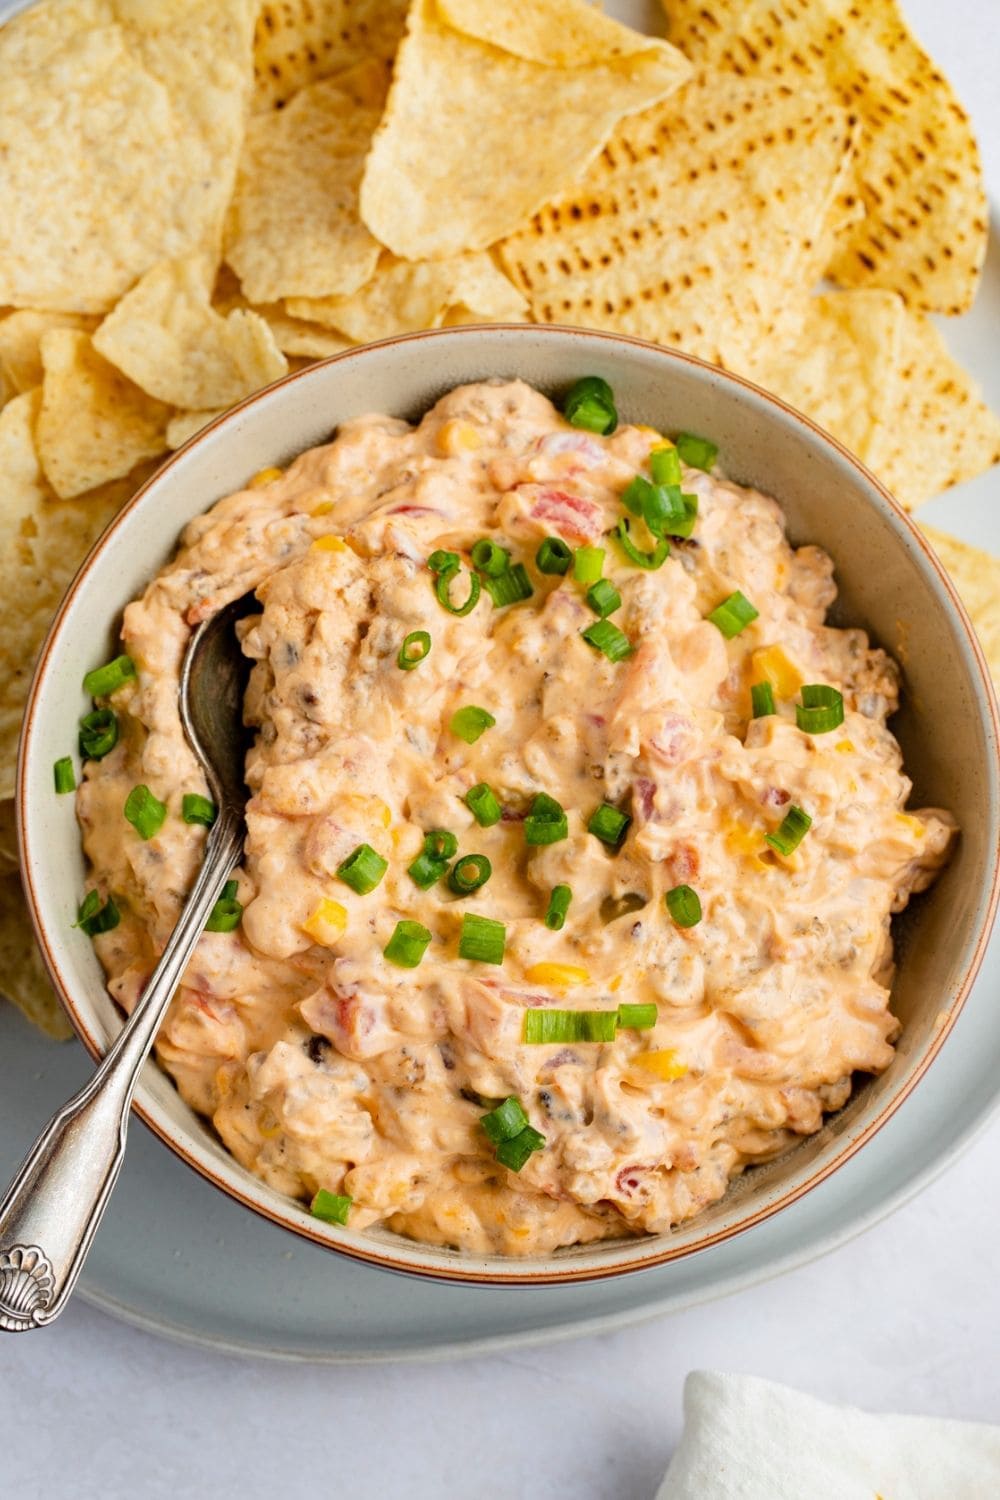 Bowl of Cowboy Crack Dip with Corn, Onions and Chips